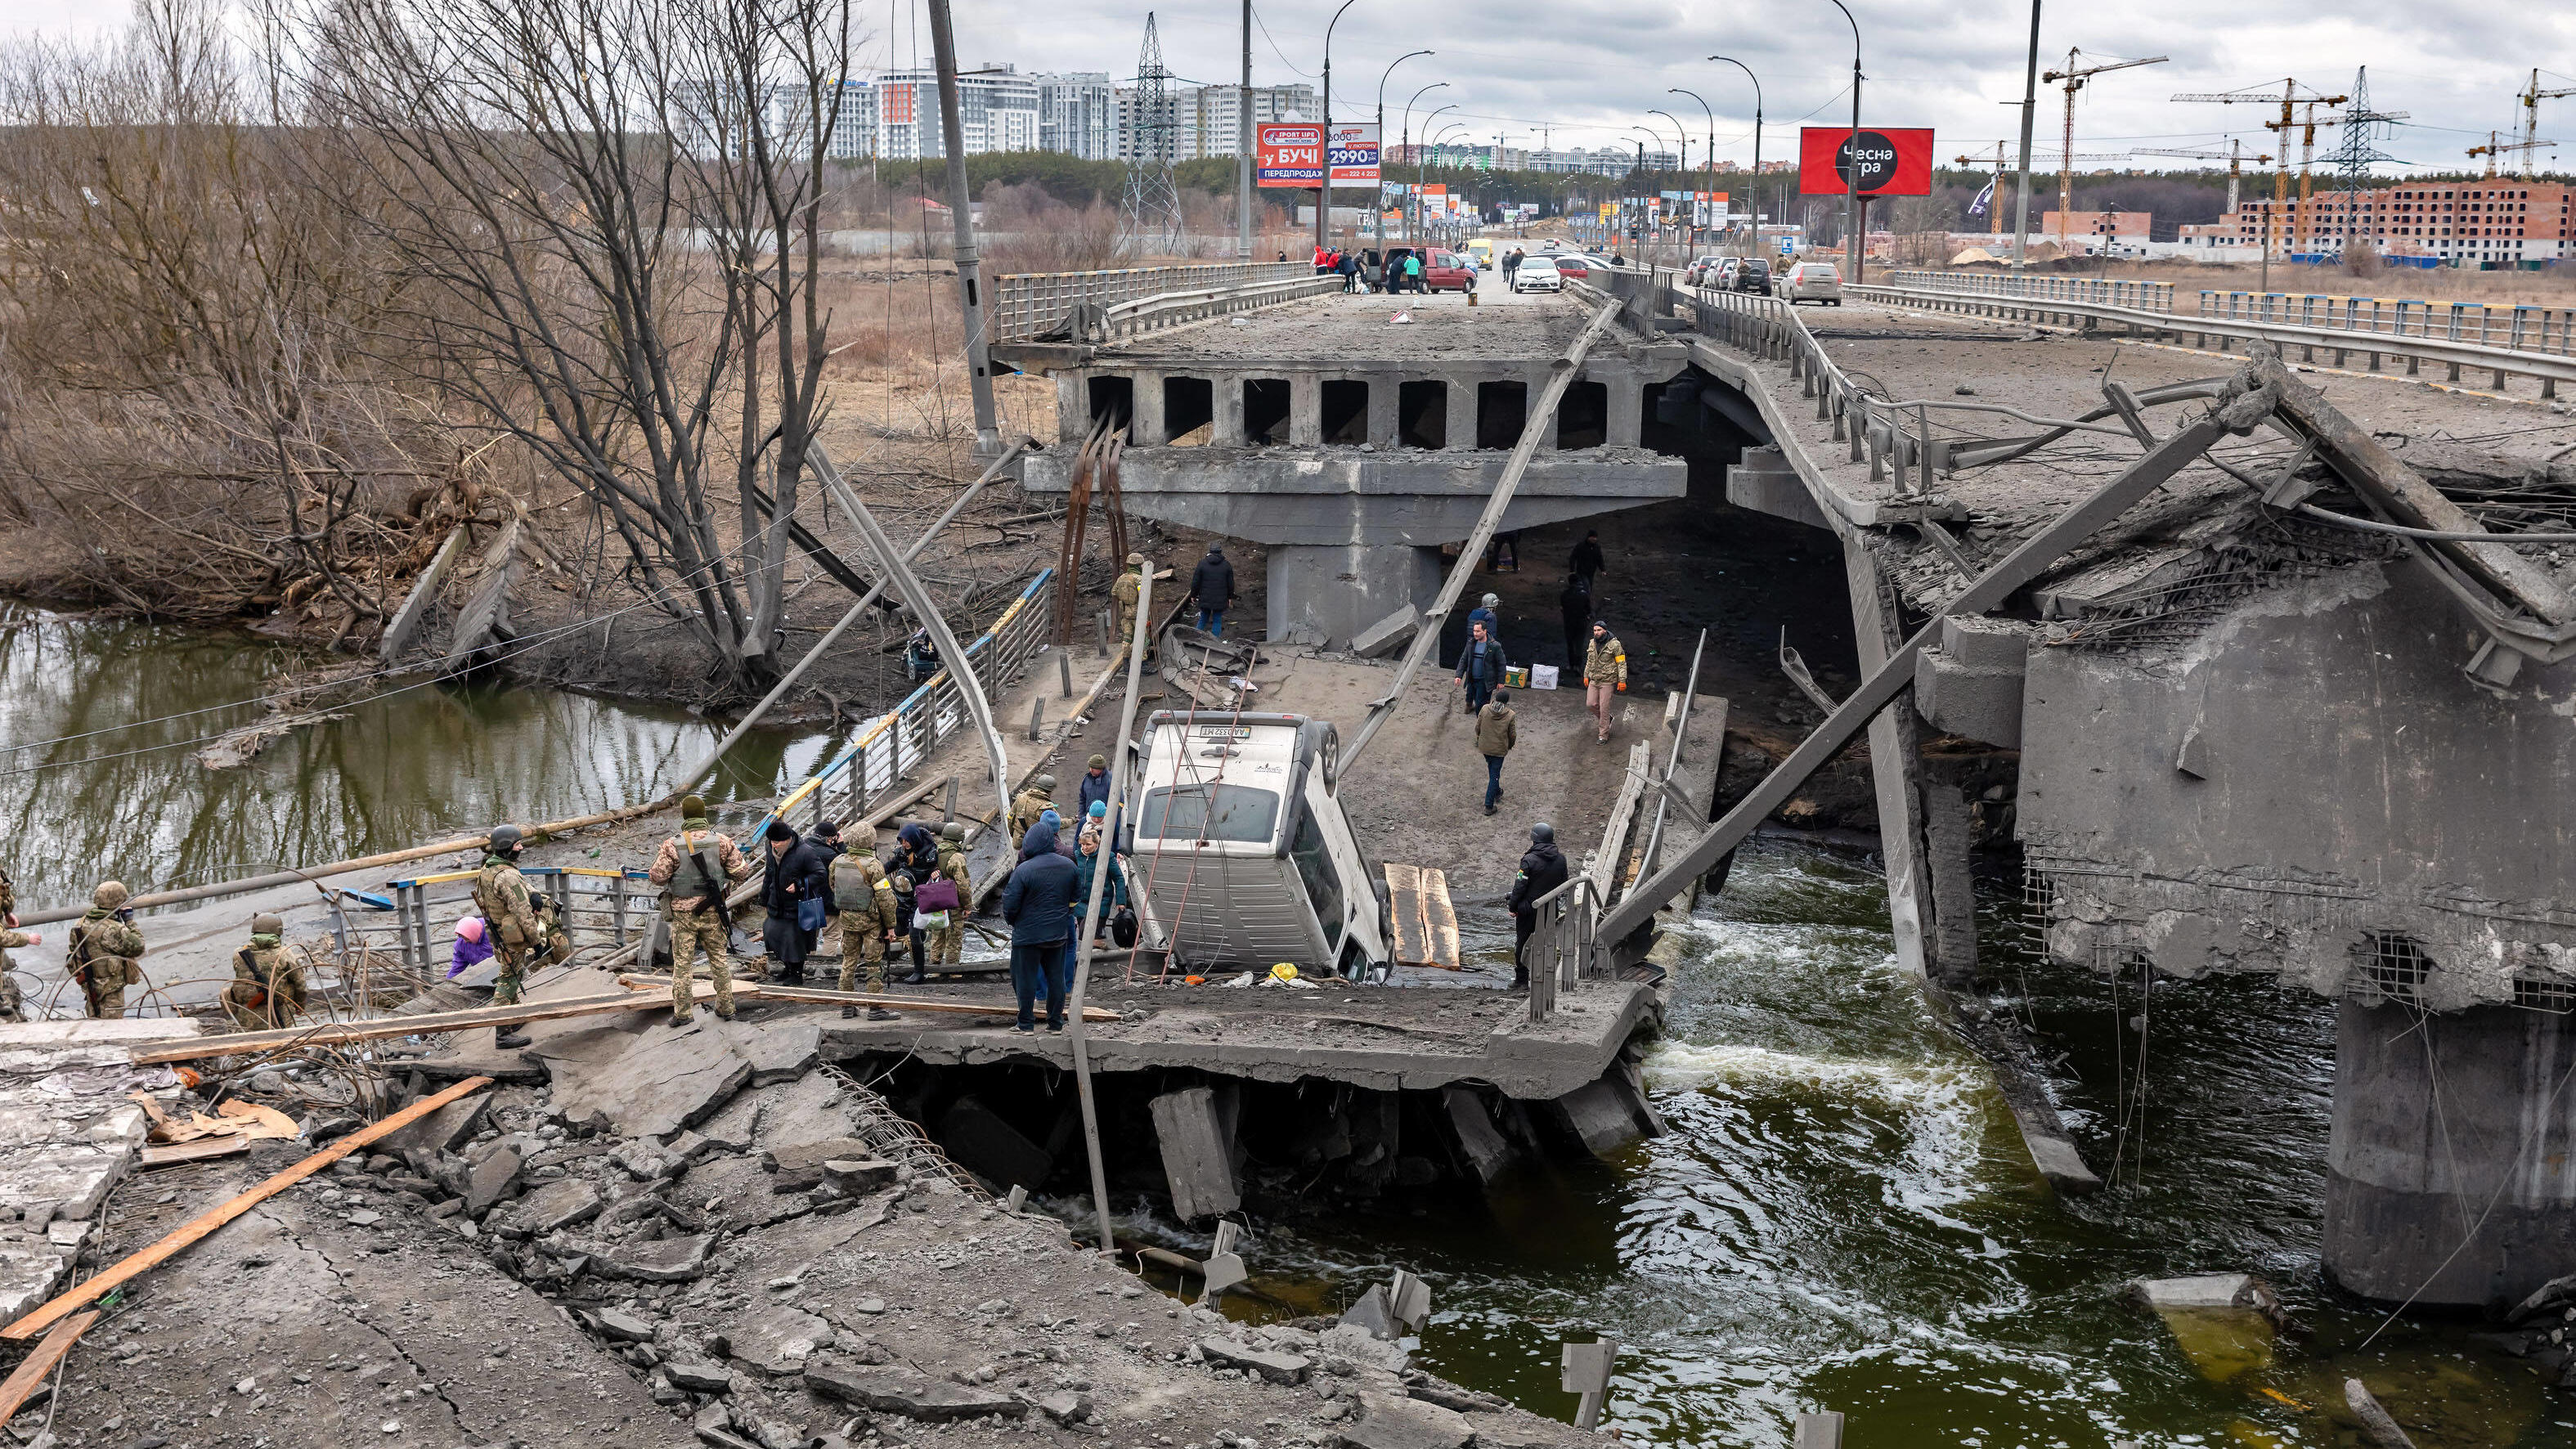 March 5, 2022, Irpin, Ukraine: People cross a destroyed bridge as they evacuate the city of Irpin, northwest of Kyiv, during a heavy shelling and bombing. Irpin Ukraine - ZUMAs197 20220305_zaa_s197_693 Copyright: xMykhayloxPalinchakx 